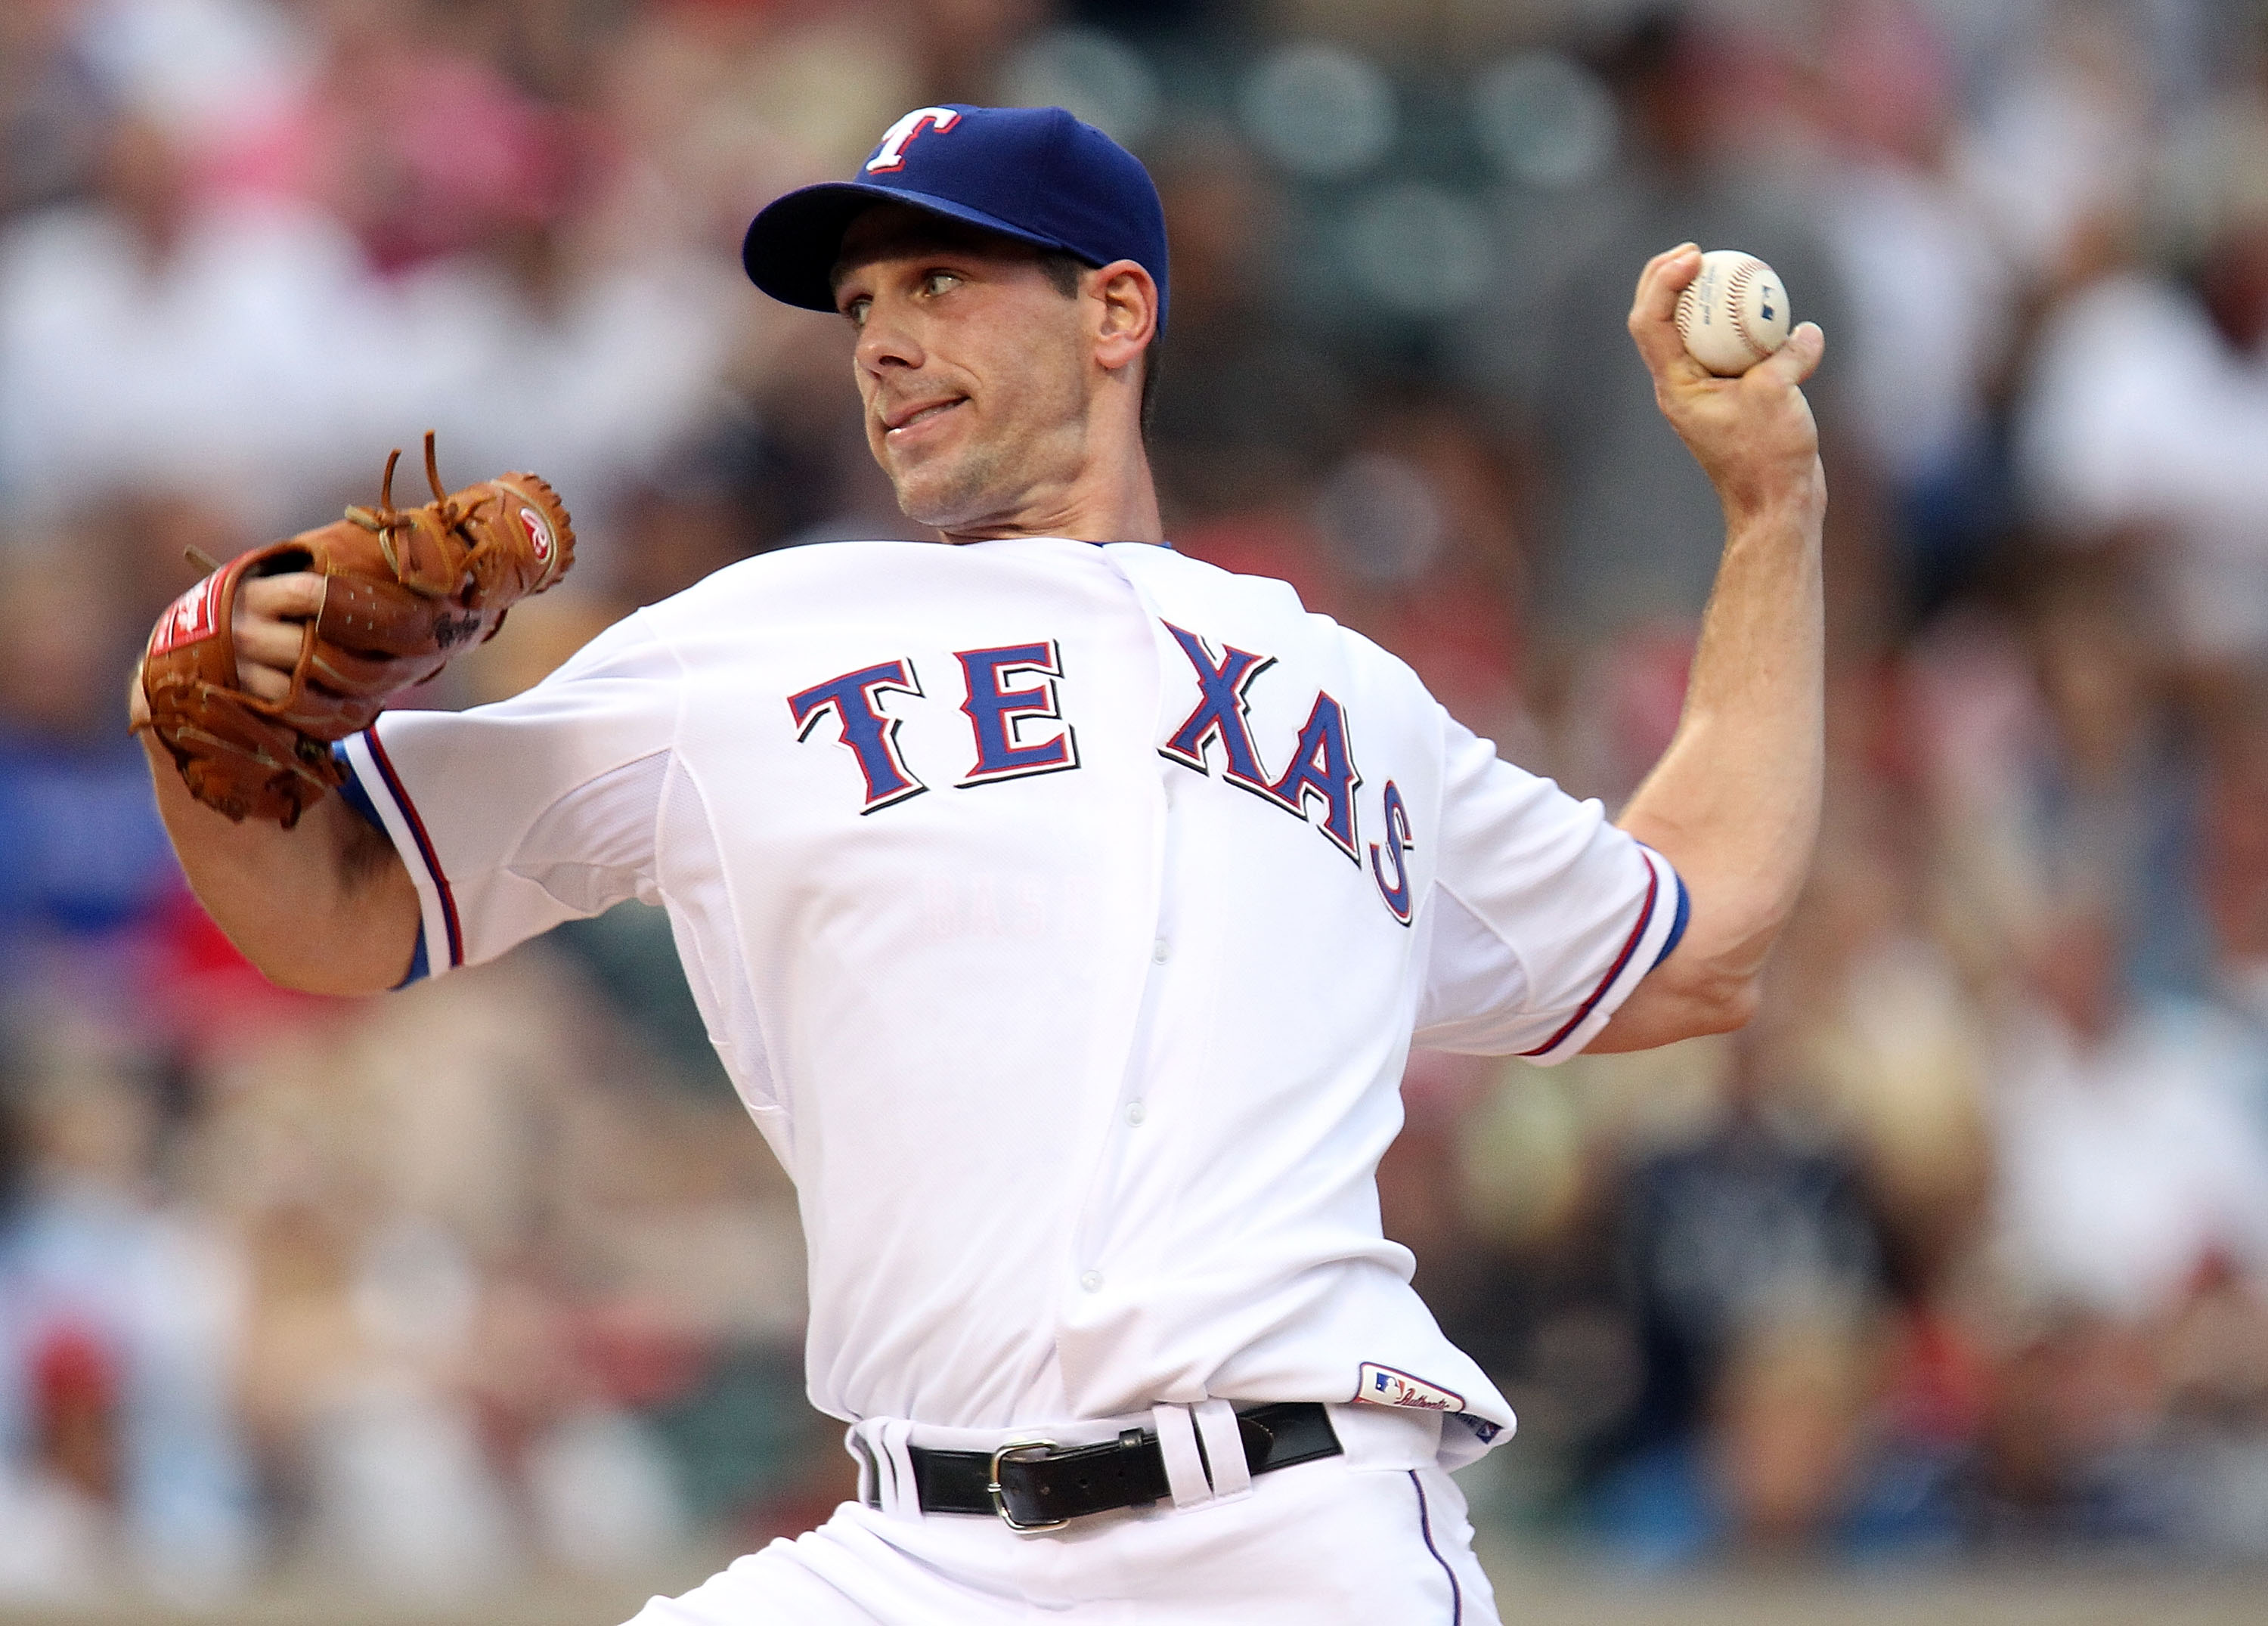 ARLINGTON, TX - JULY 10:  Pitcher Cliff Lee #33 of the Texas Rangers throws against the Baltimore Orioles on July 10, 2010 at Rangers Ballpark in Arlington, Texas.  (Photo by Ronald Martinez/Getty Images)